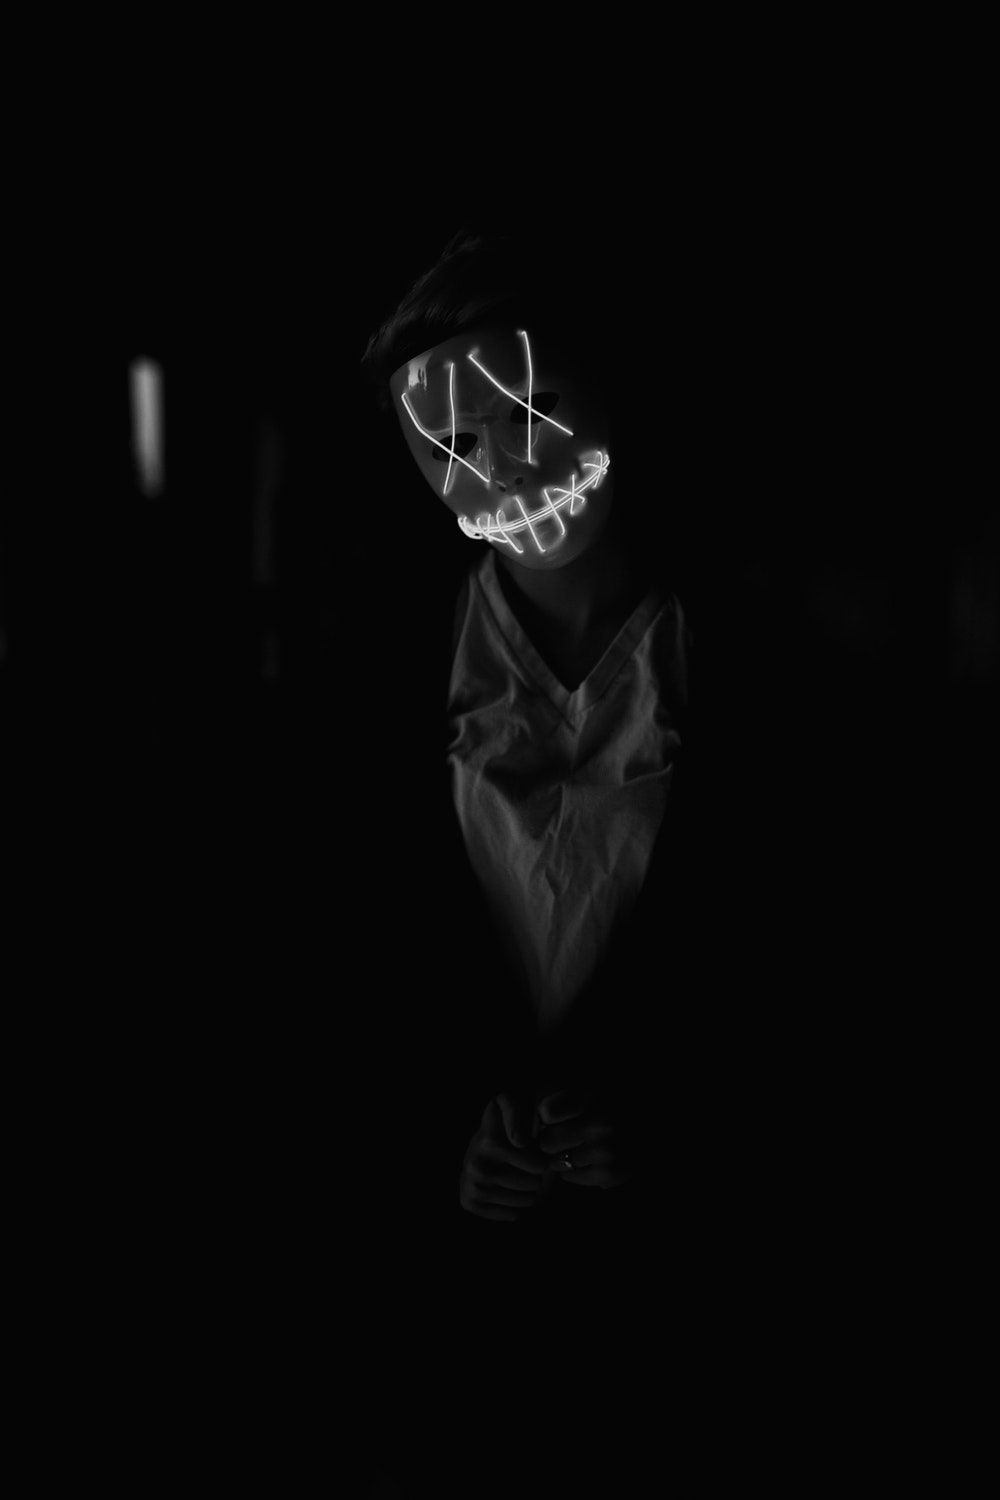 A black and white photo of the face in darkness - Black anime, clown